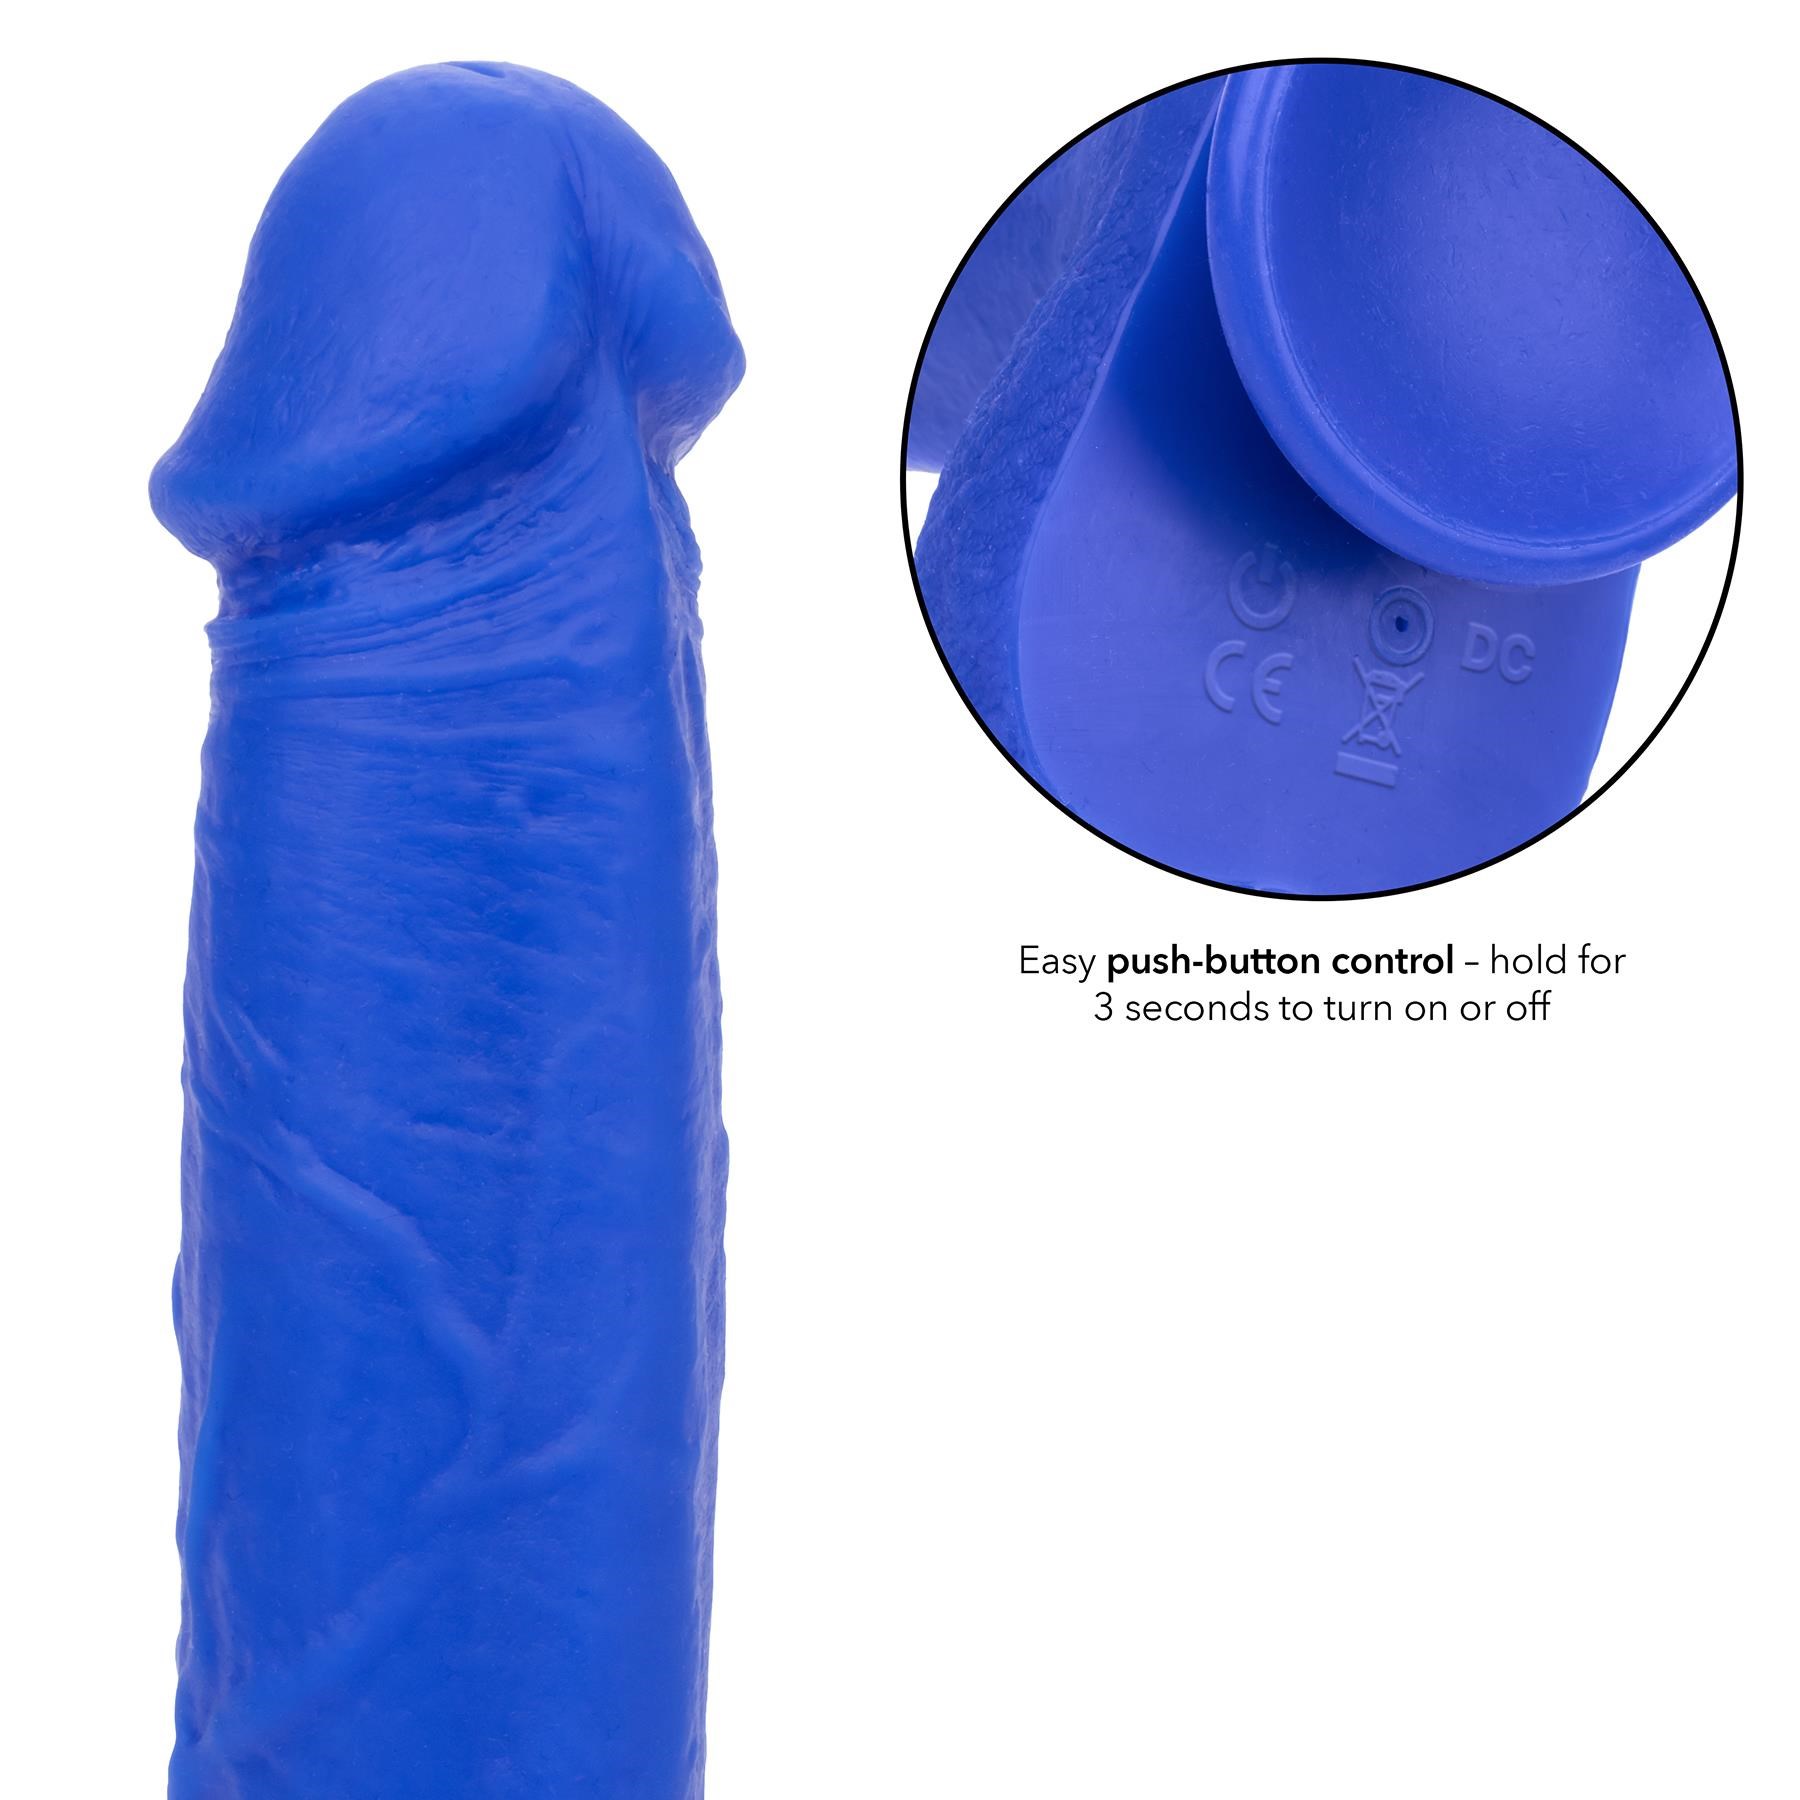 Admiral 8 Inch Vibrating Captain Dildo - Product Shot - Showing Suction Cup